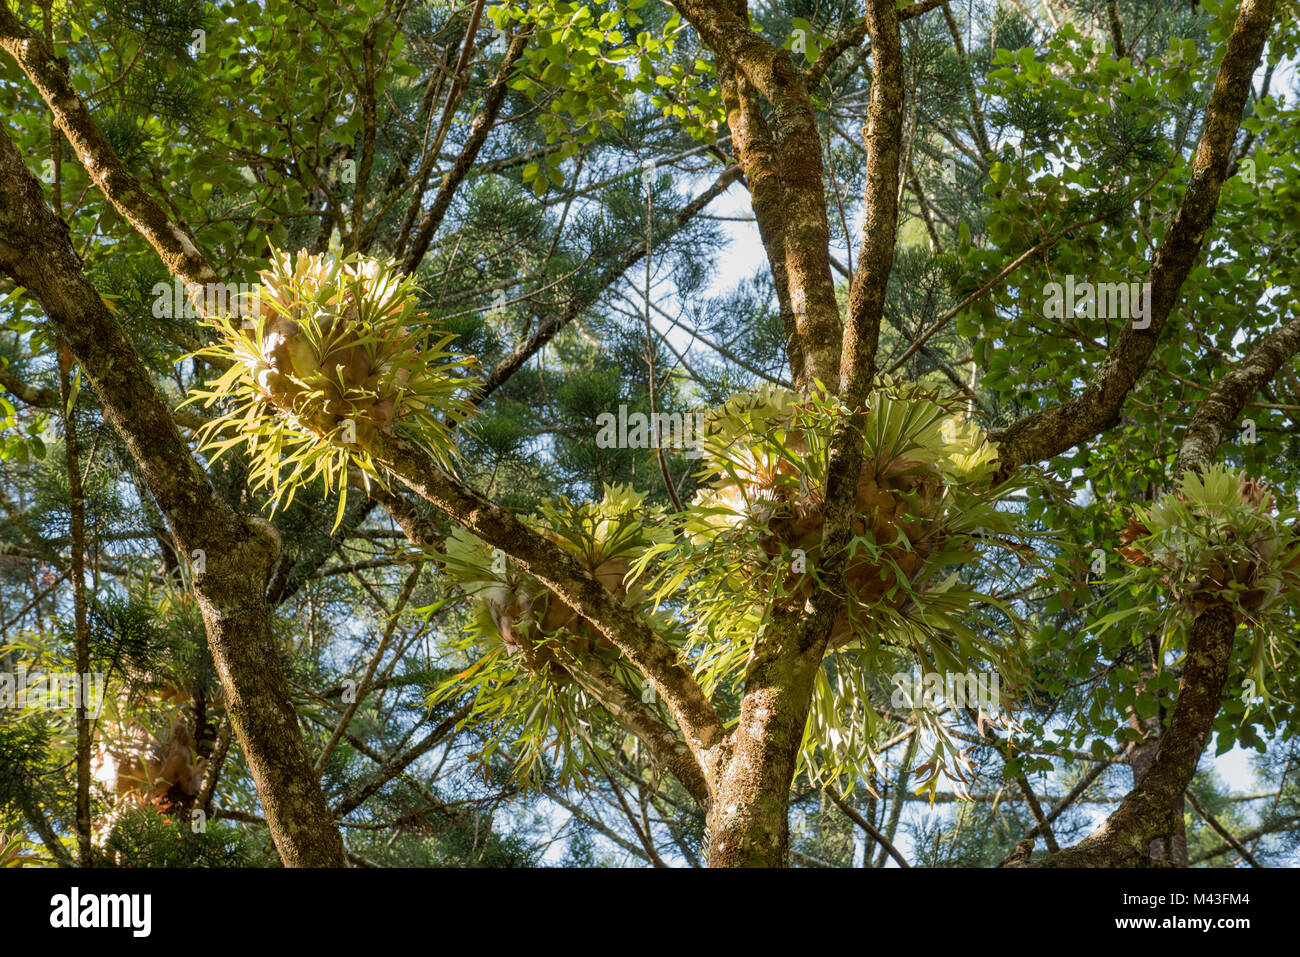 Massed Elkhorn plants (Platycerium bifurcatum) growing high in the canopy of a Hoop Pine forest in the Yarriabini National Park in NSW, Australia Stock Photo